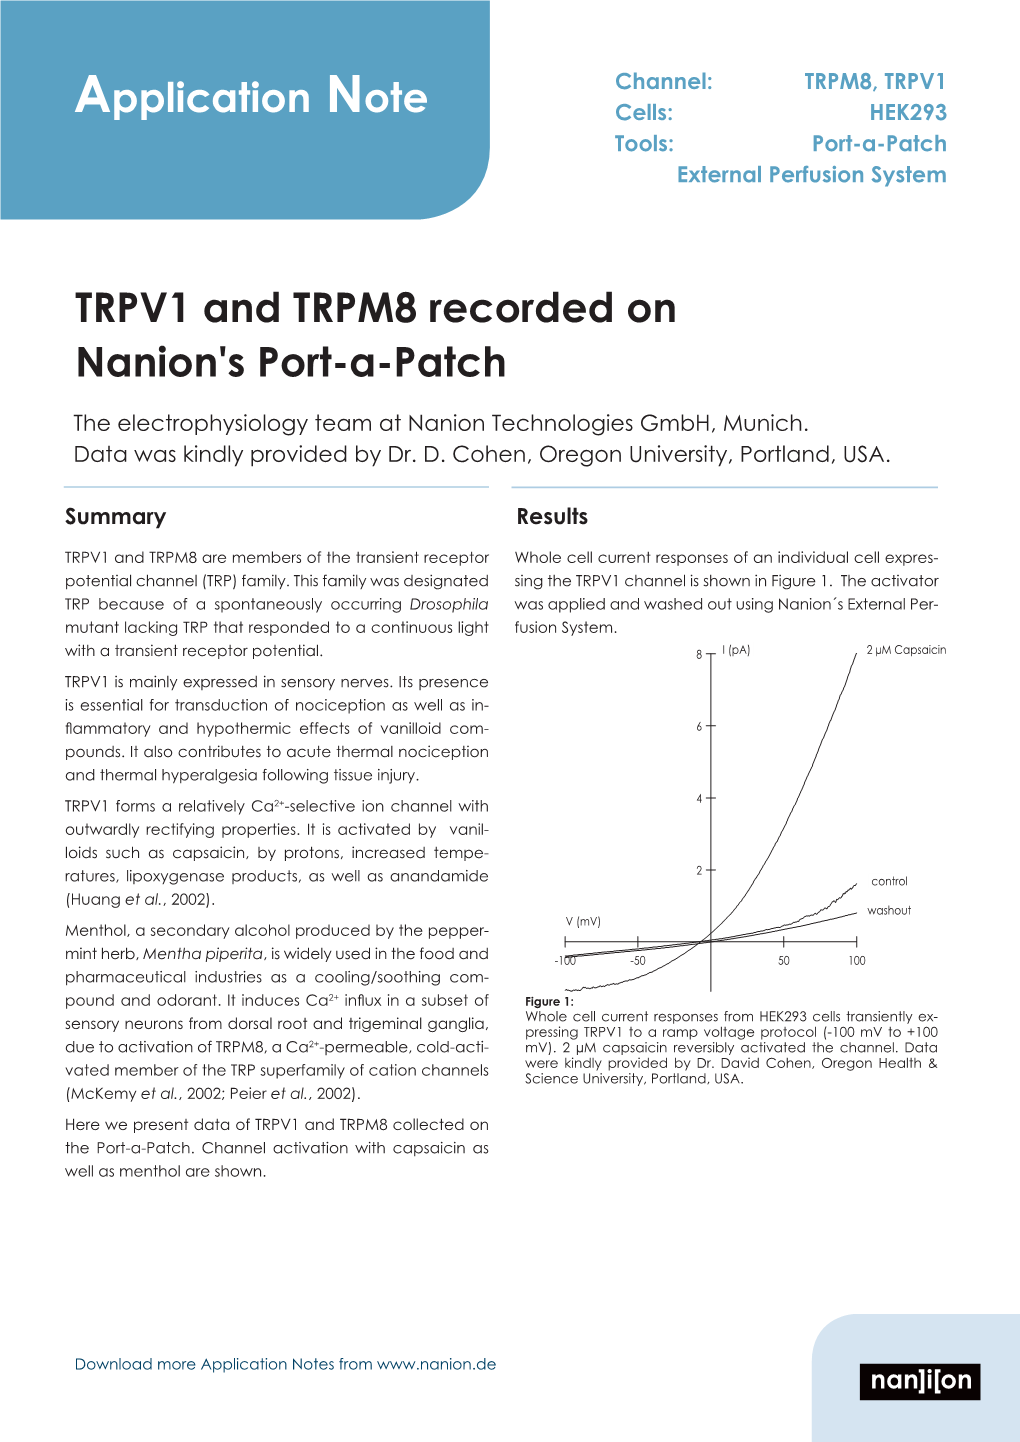 Application Note TRPV1 and TRPM8 Recorded on Nanion's Port-A-Patch